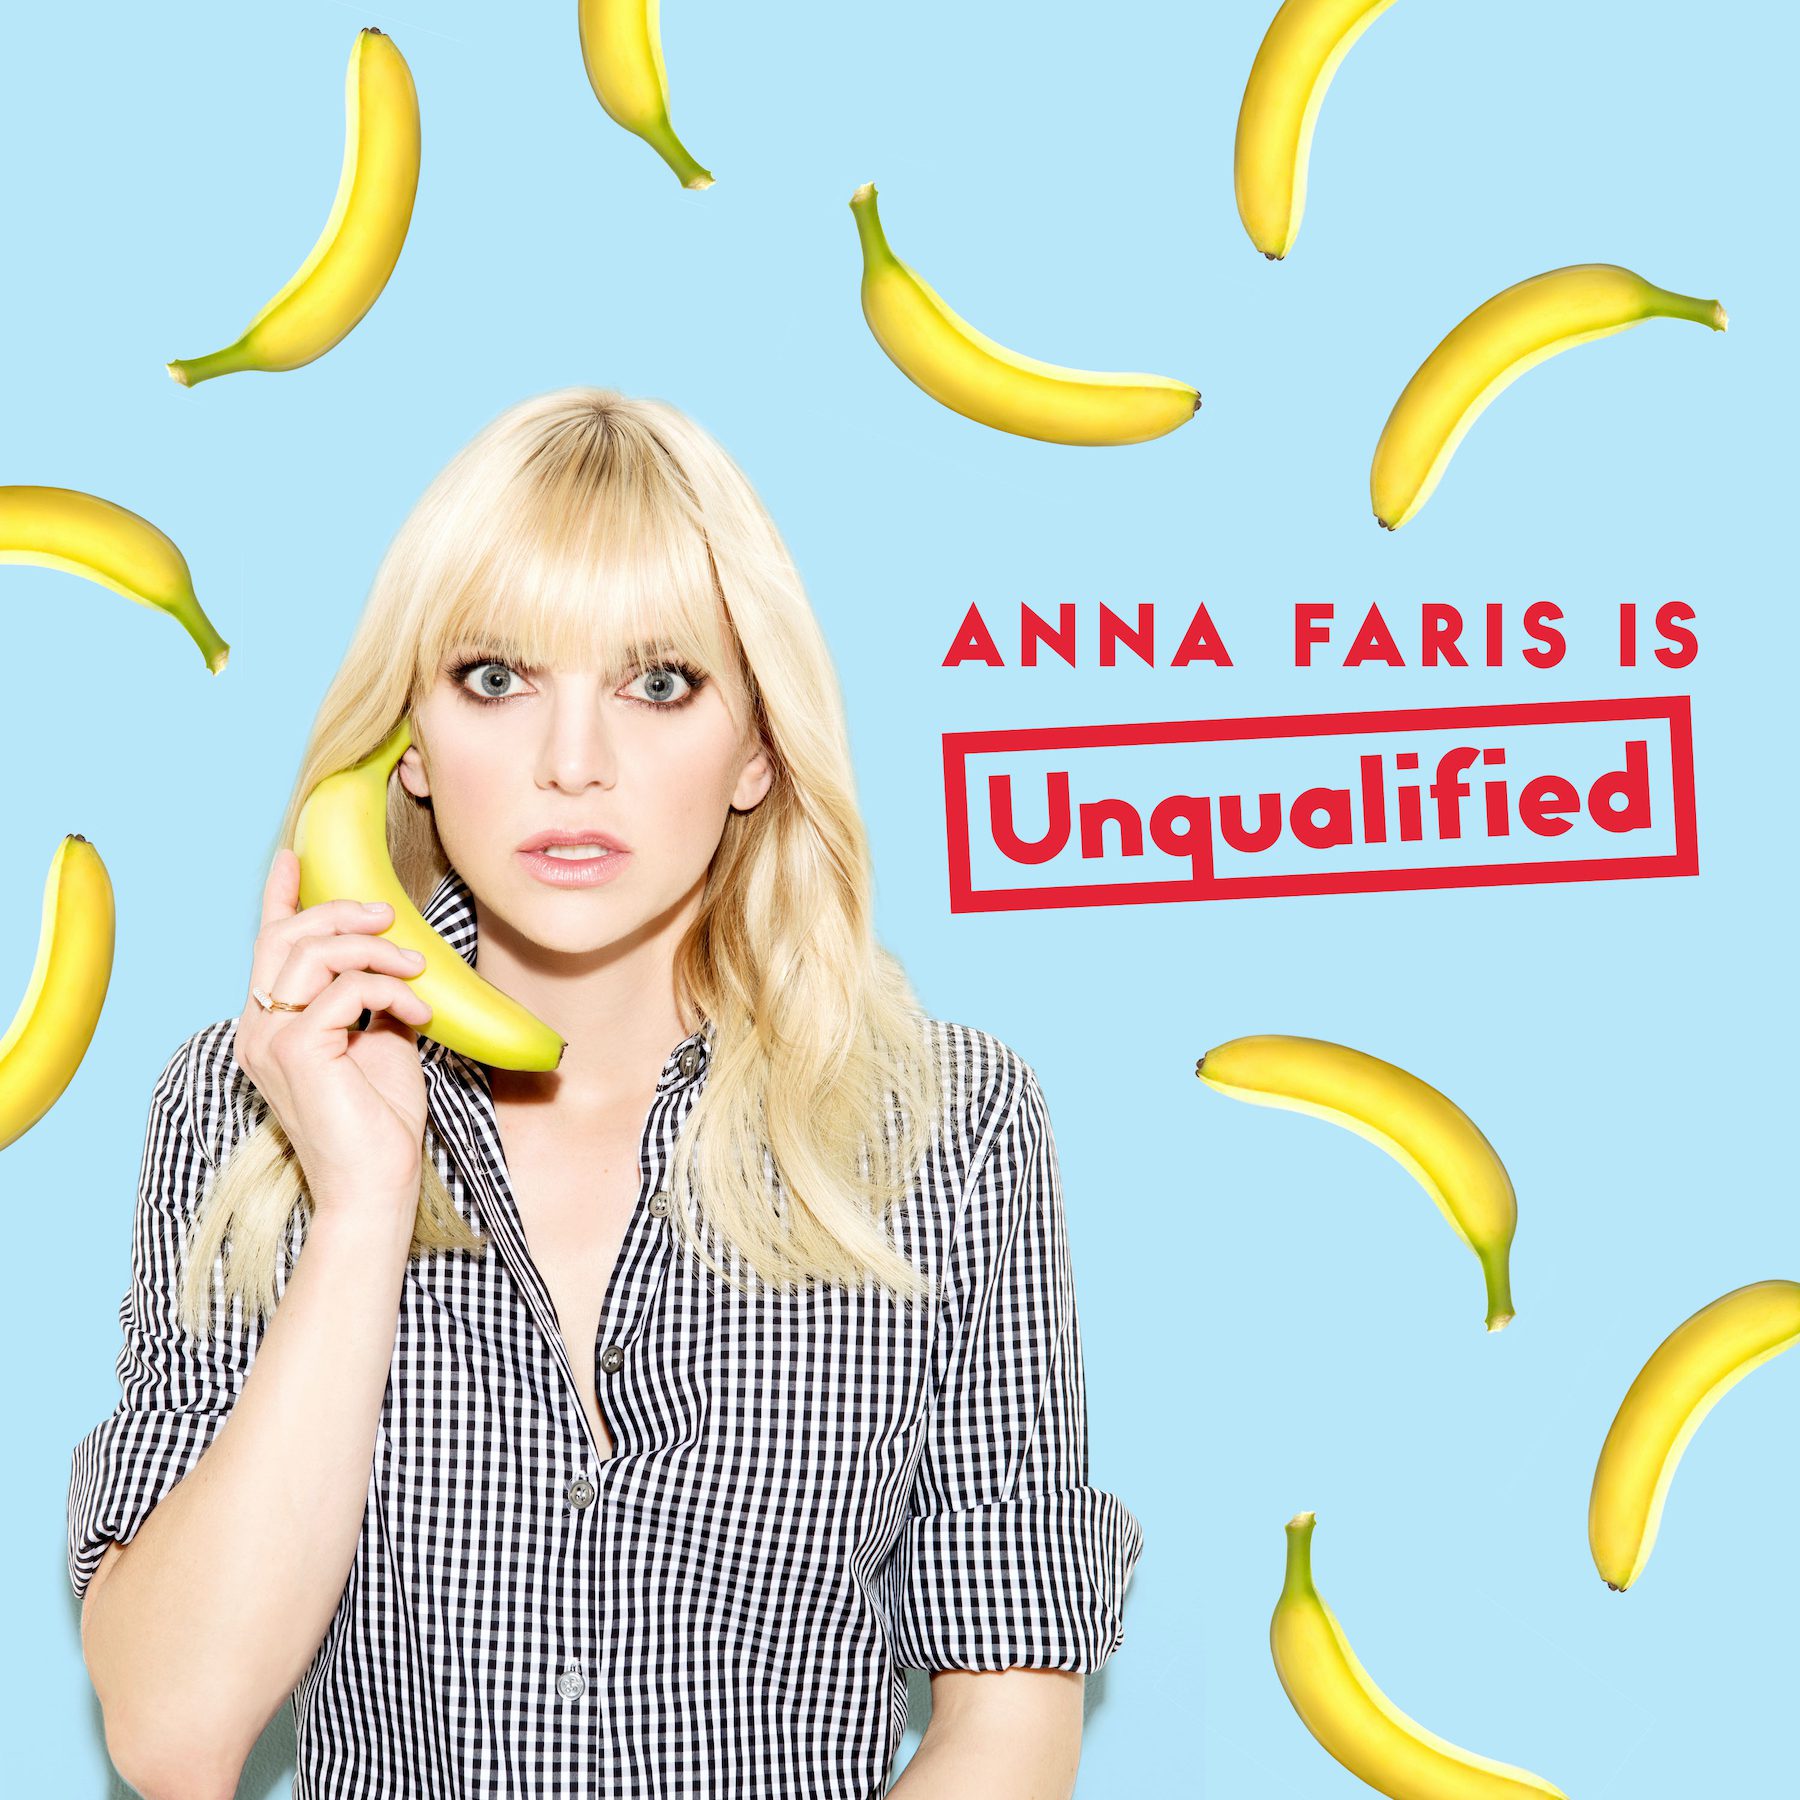 Artwork for Anna Faris is Unqualified podcast, red text against light blue background with actress holding banana like a phone.